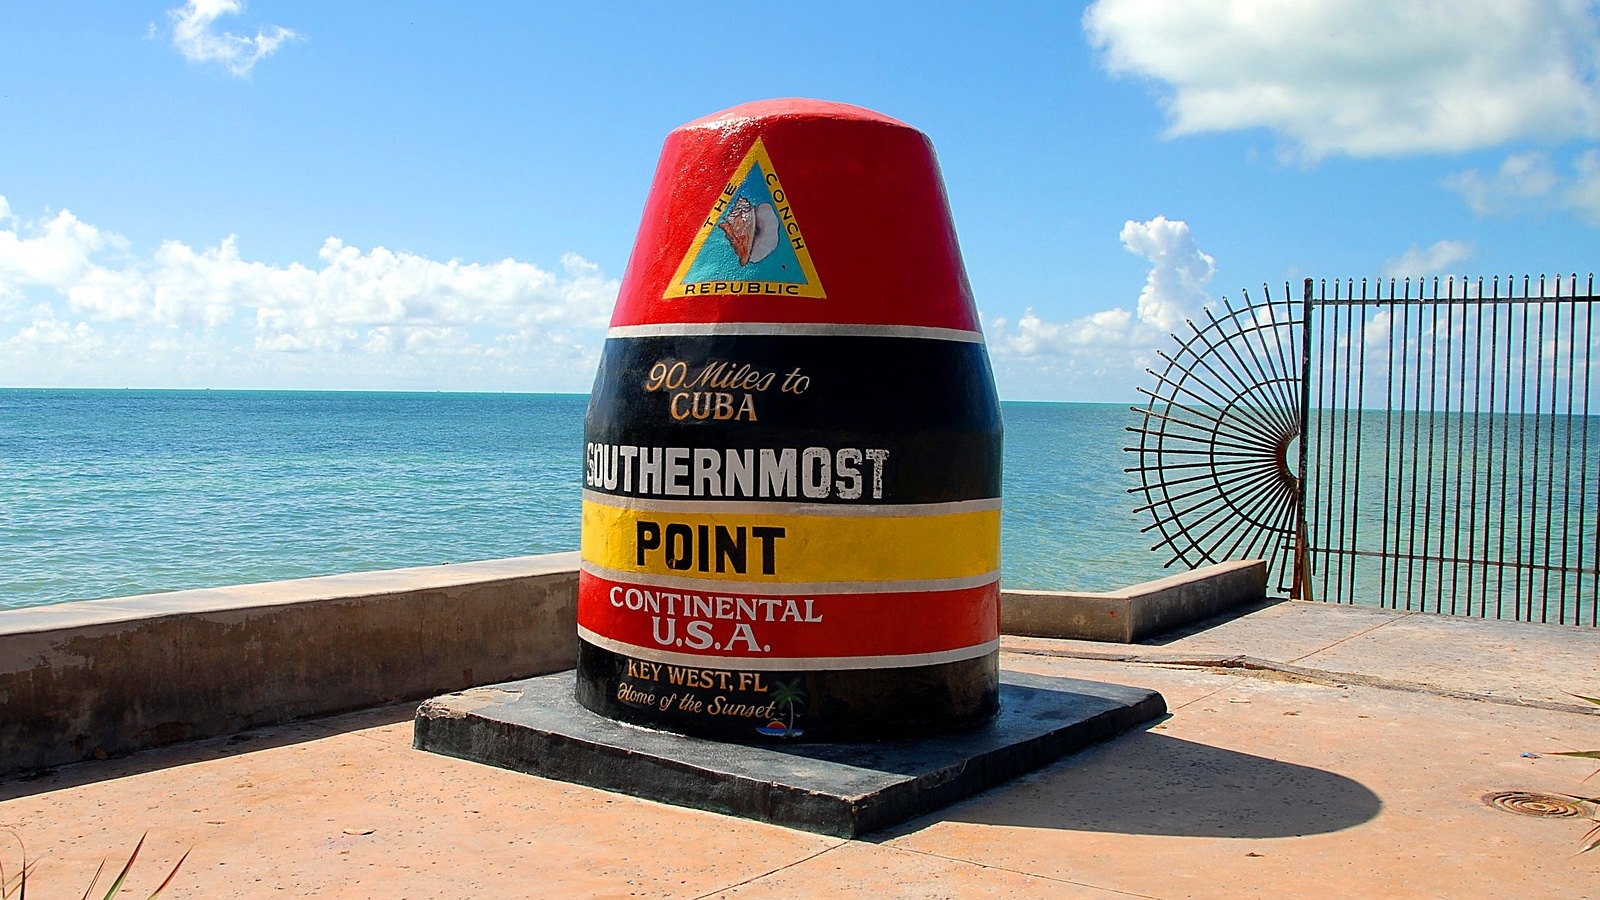 City Of Key West Is The Southernmost City In The Contiguous United States